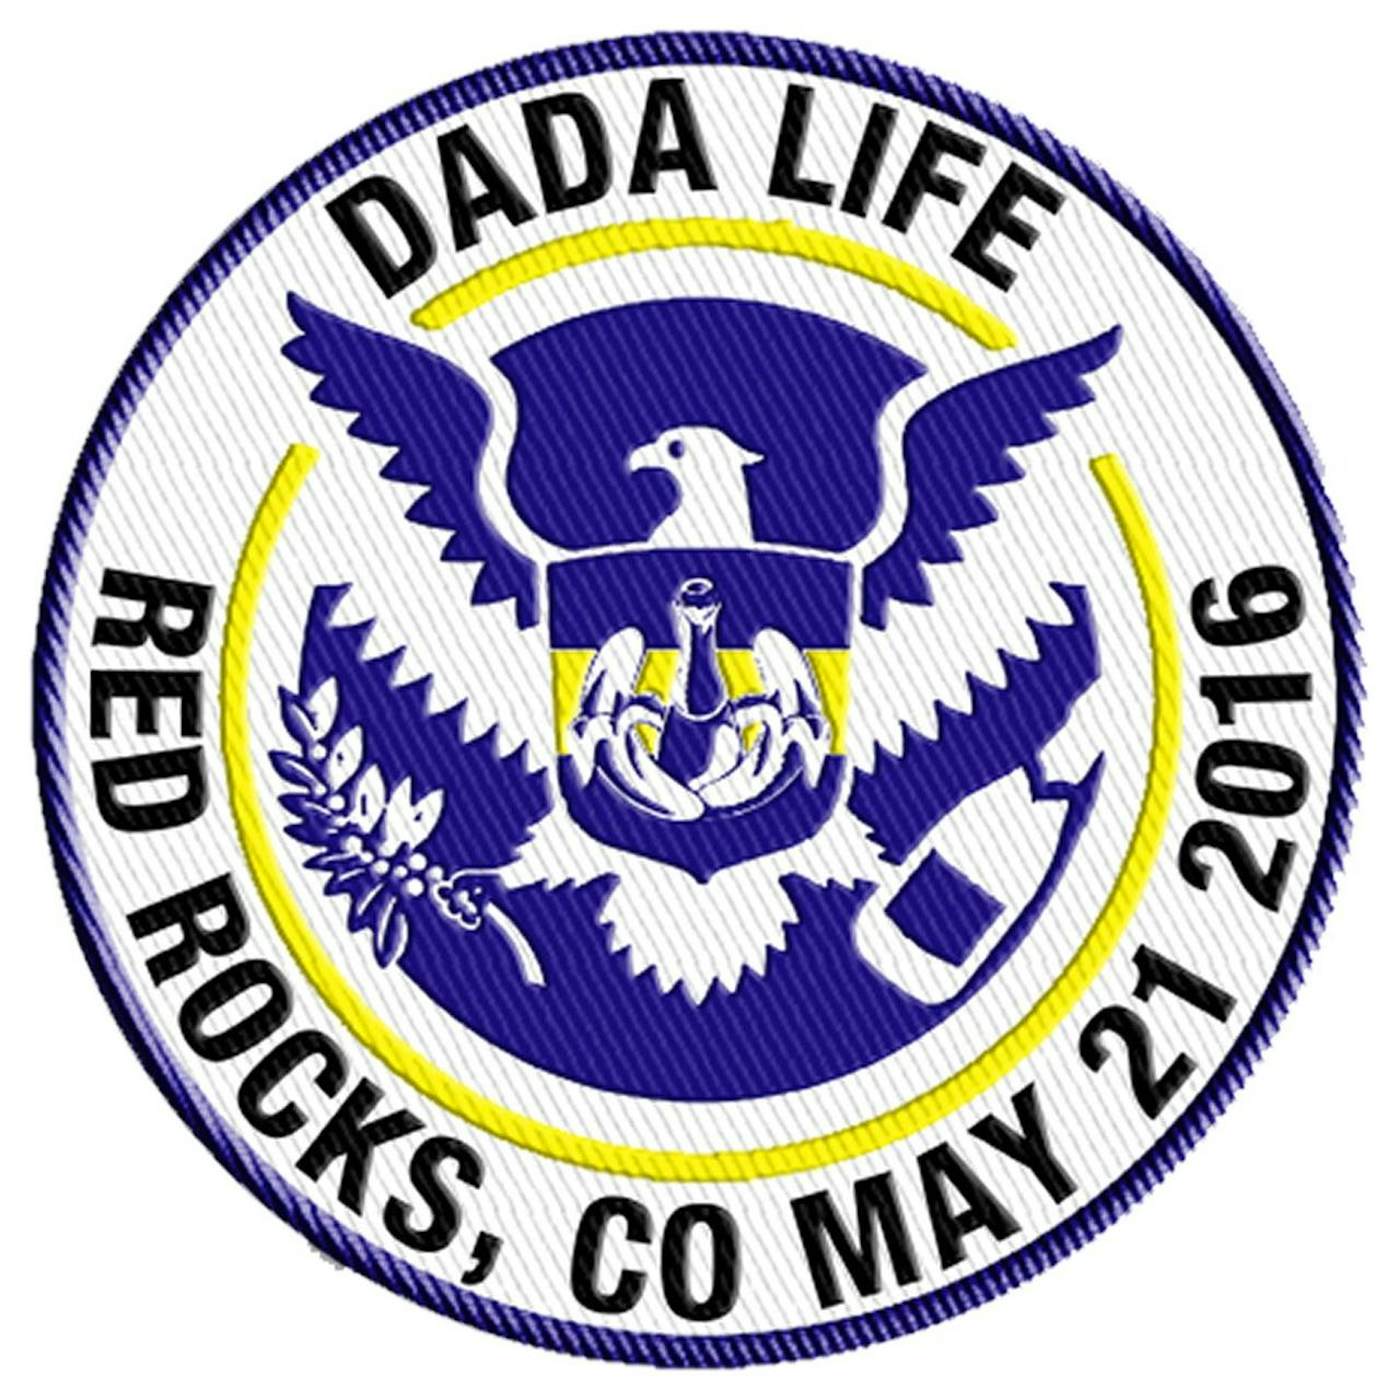 DADA LIFE PATCH - RED ROCKS, CO MAY 21 2016